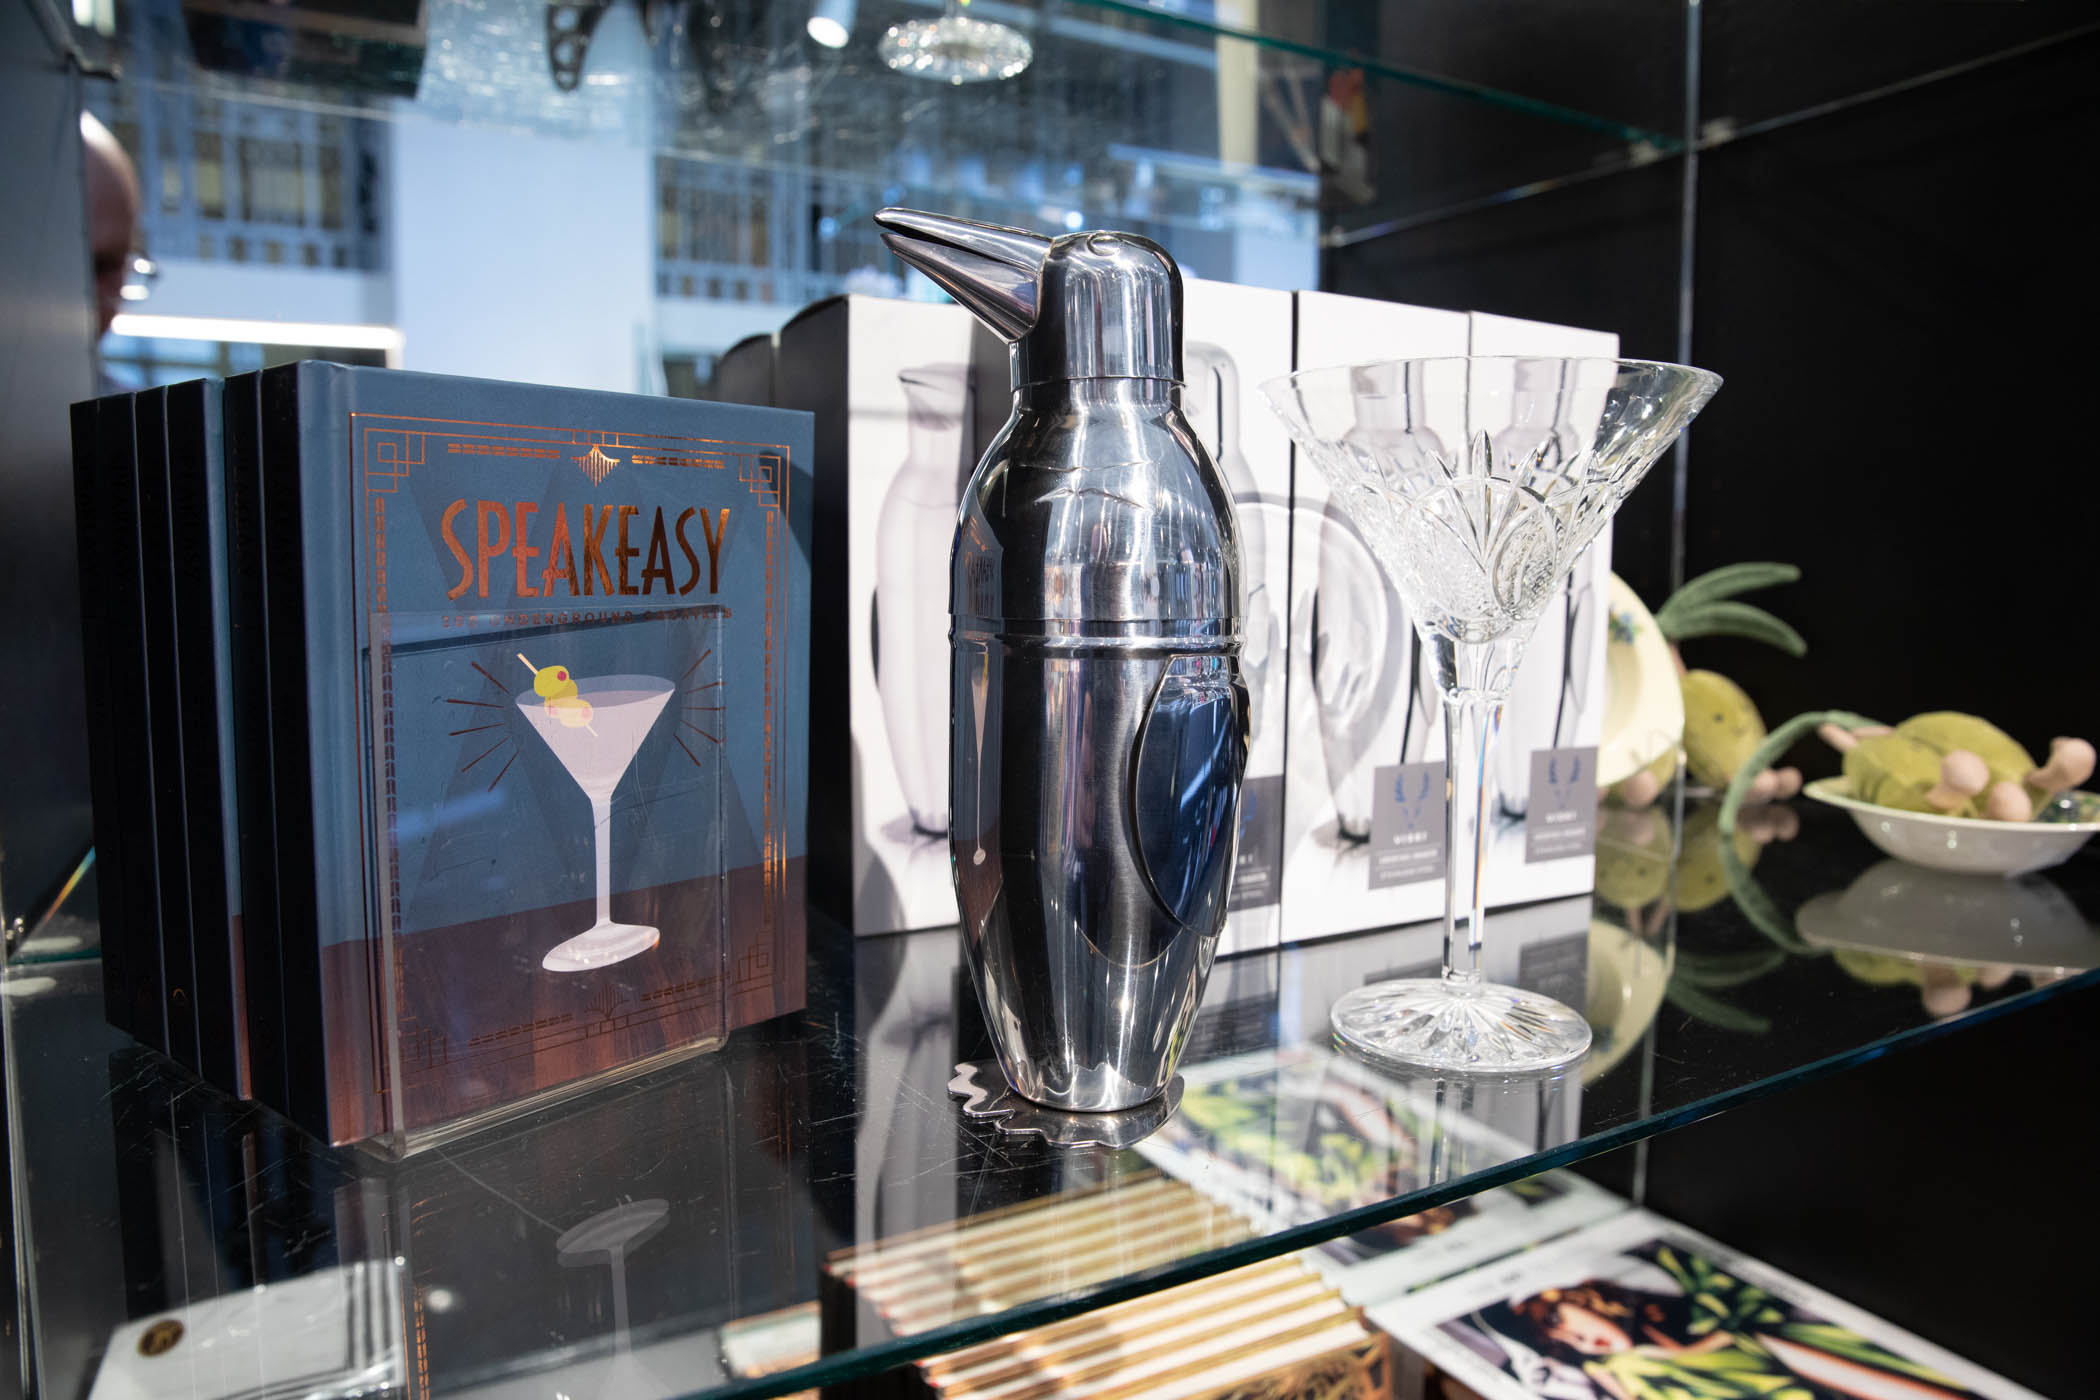 Silver penguin shaker and a crystal martini glass next to a speakeasy book